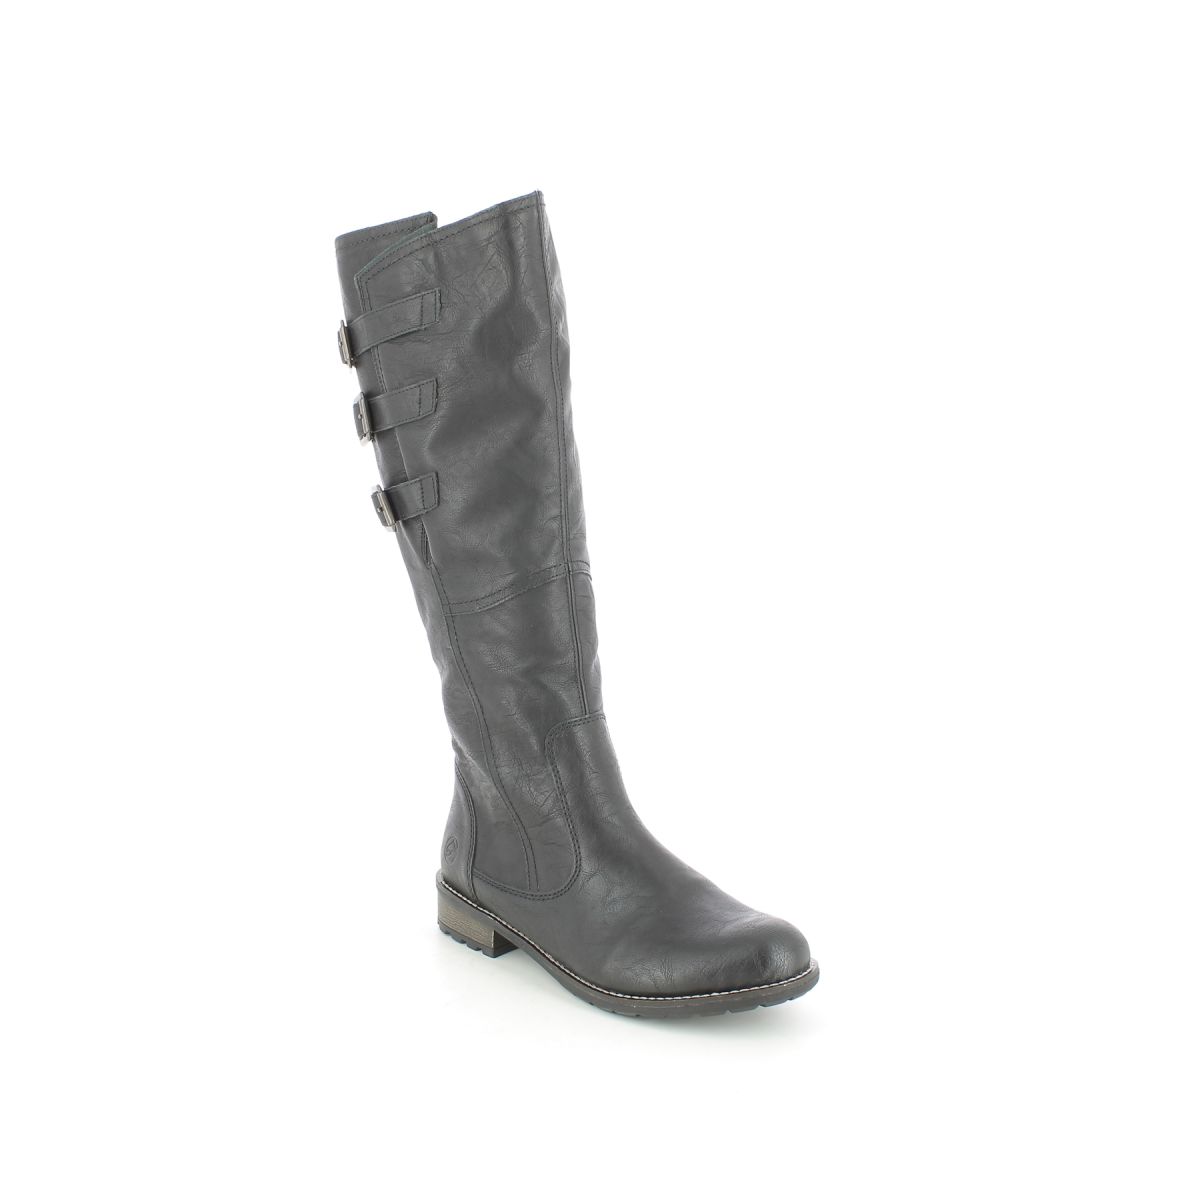 Remonte Shebuc Wide-Leg Black Womens Knee-High Boots R3370-01 In Size 37 In Plain Black